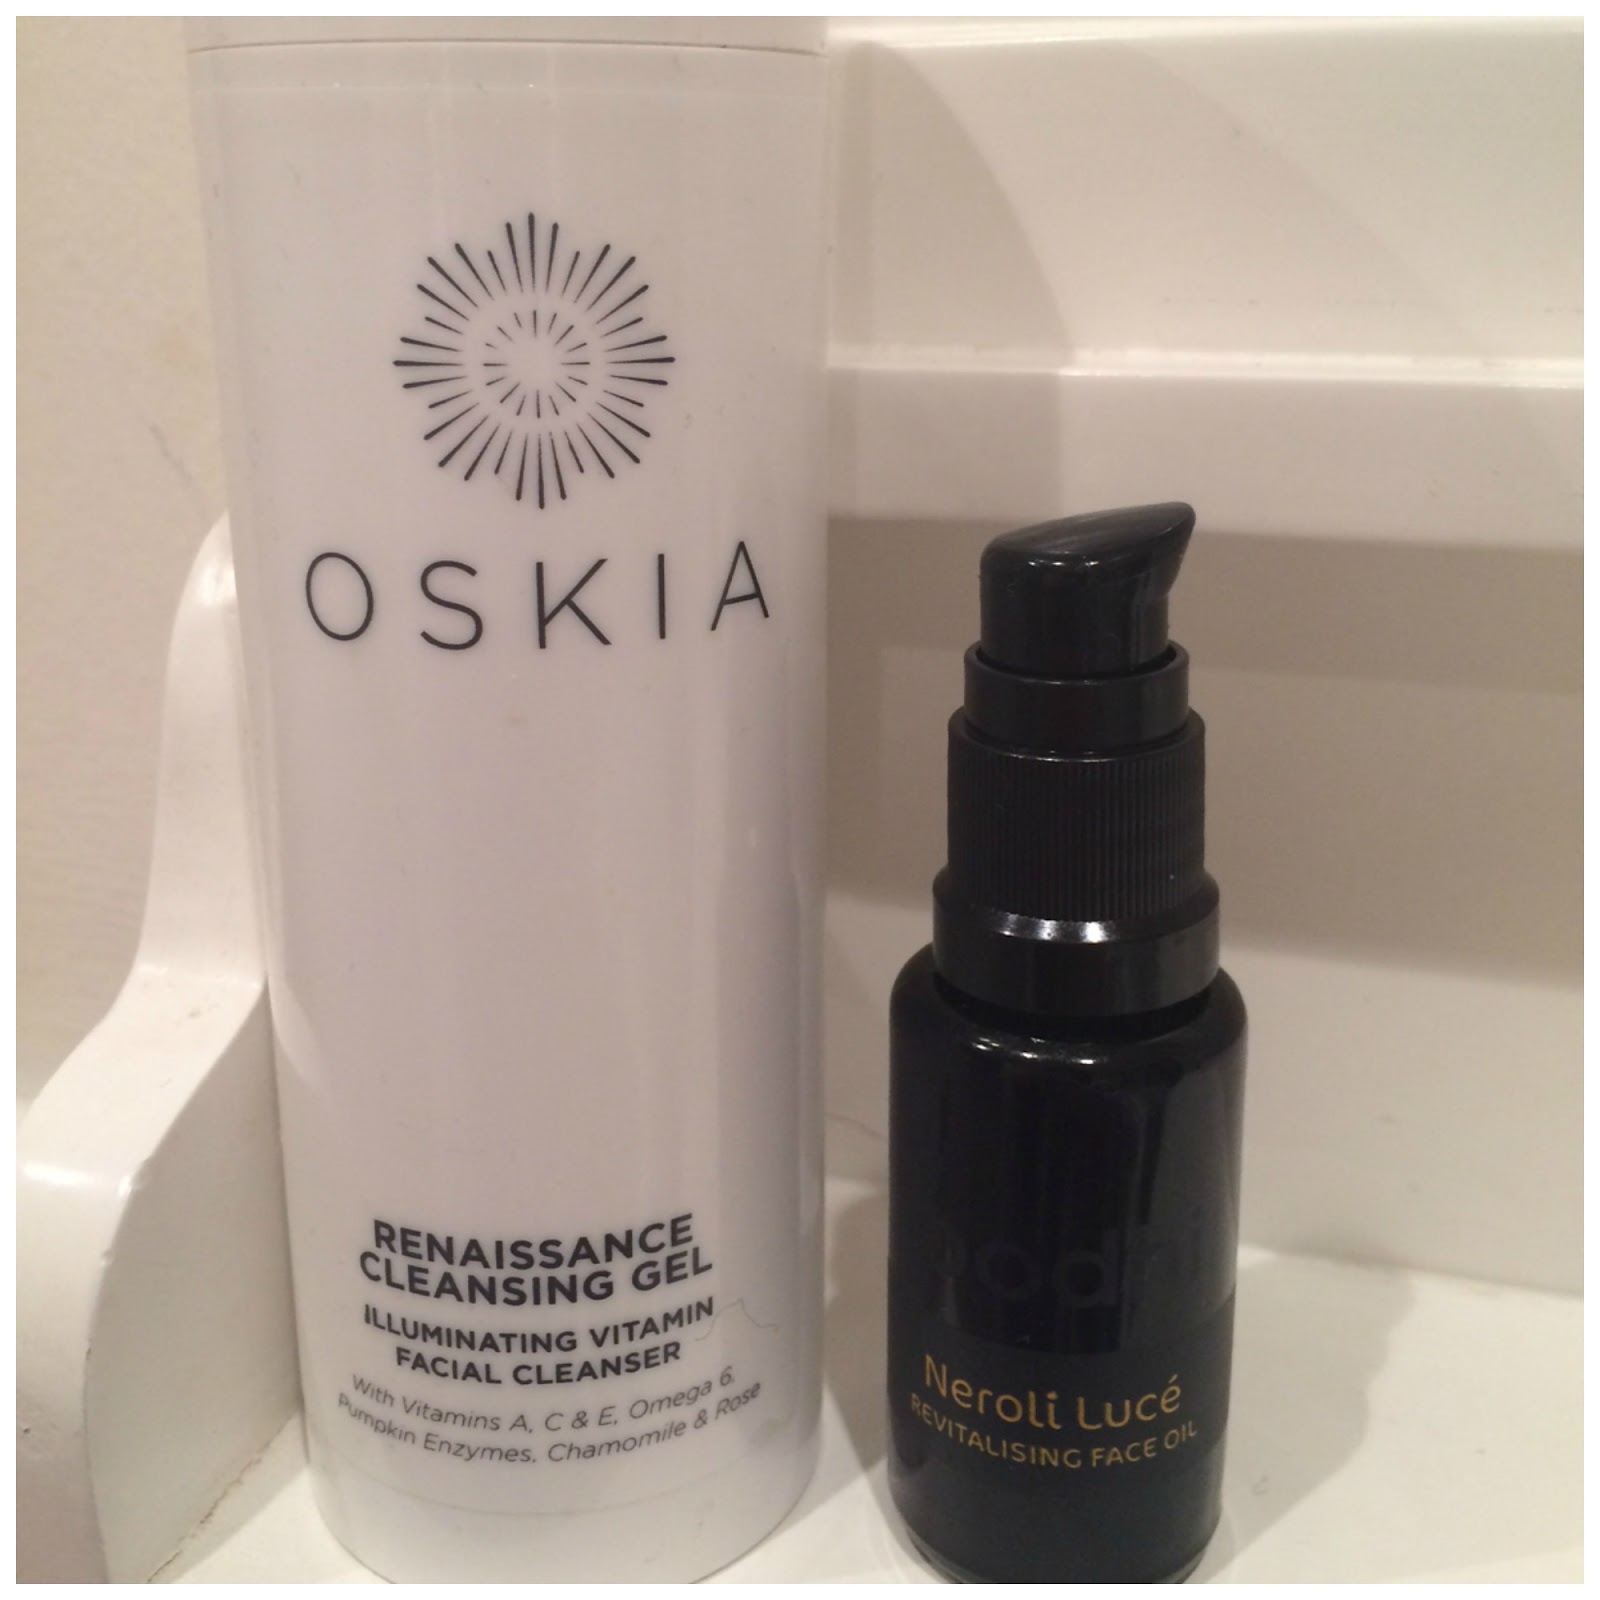 This Natural Bee favourite products featuring Oskia and Bodhi & Birch